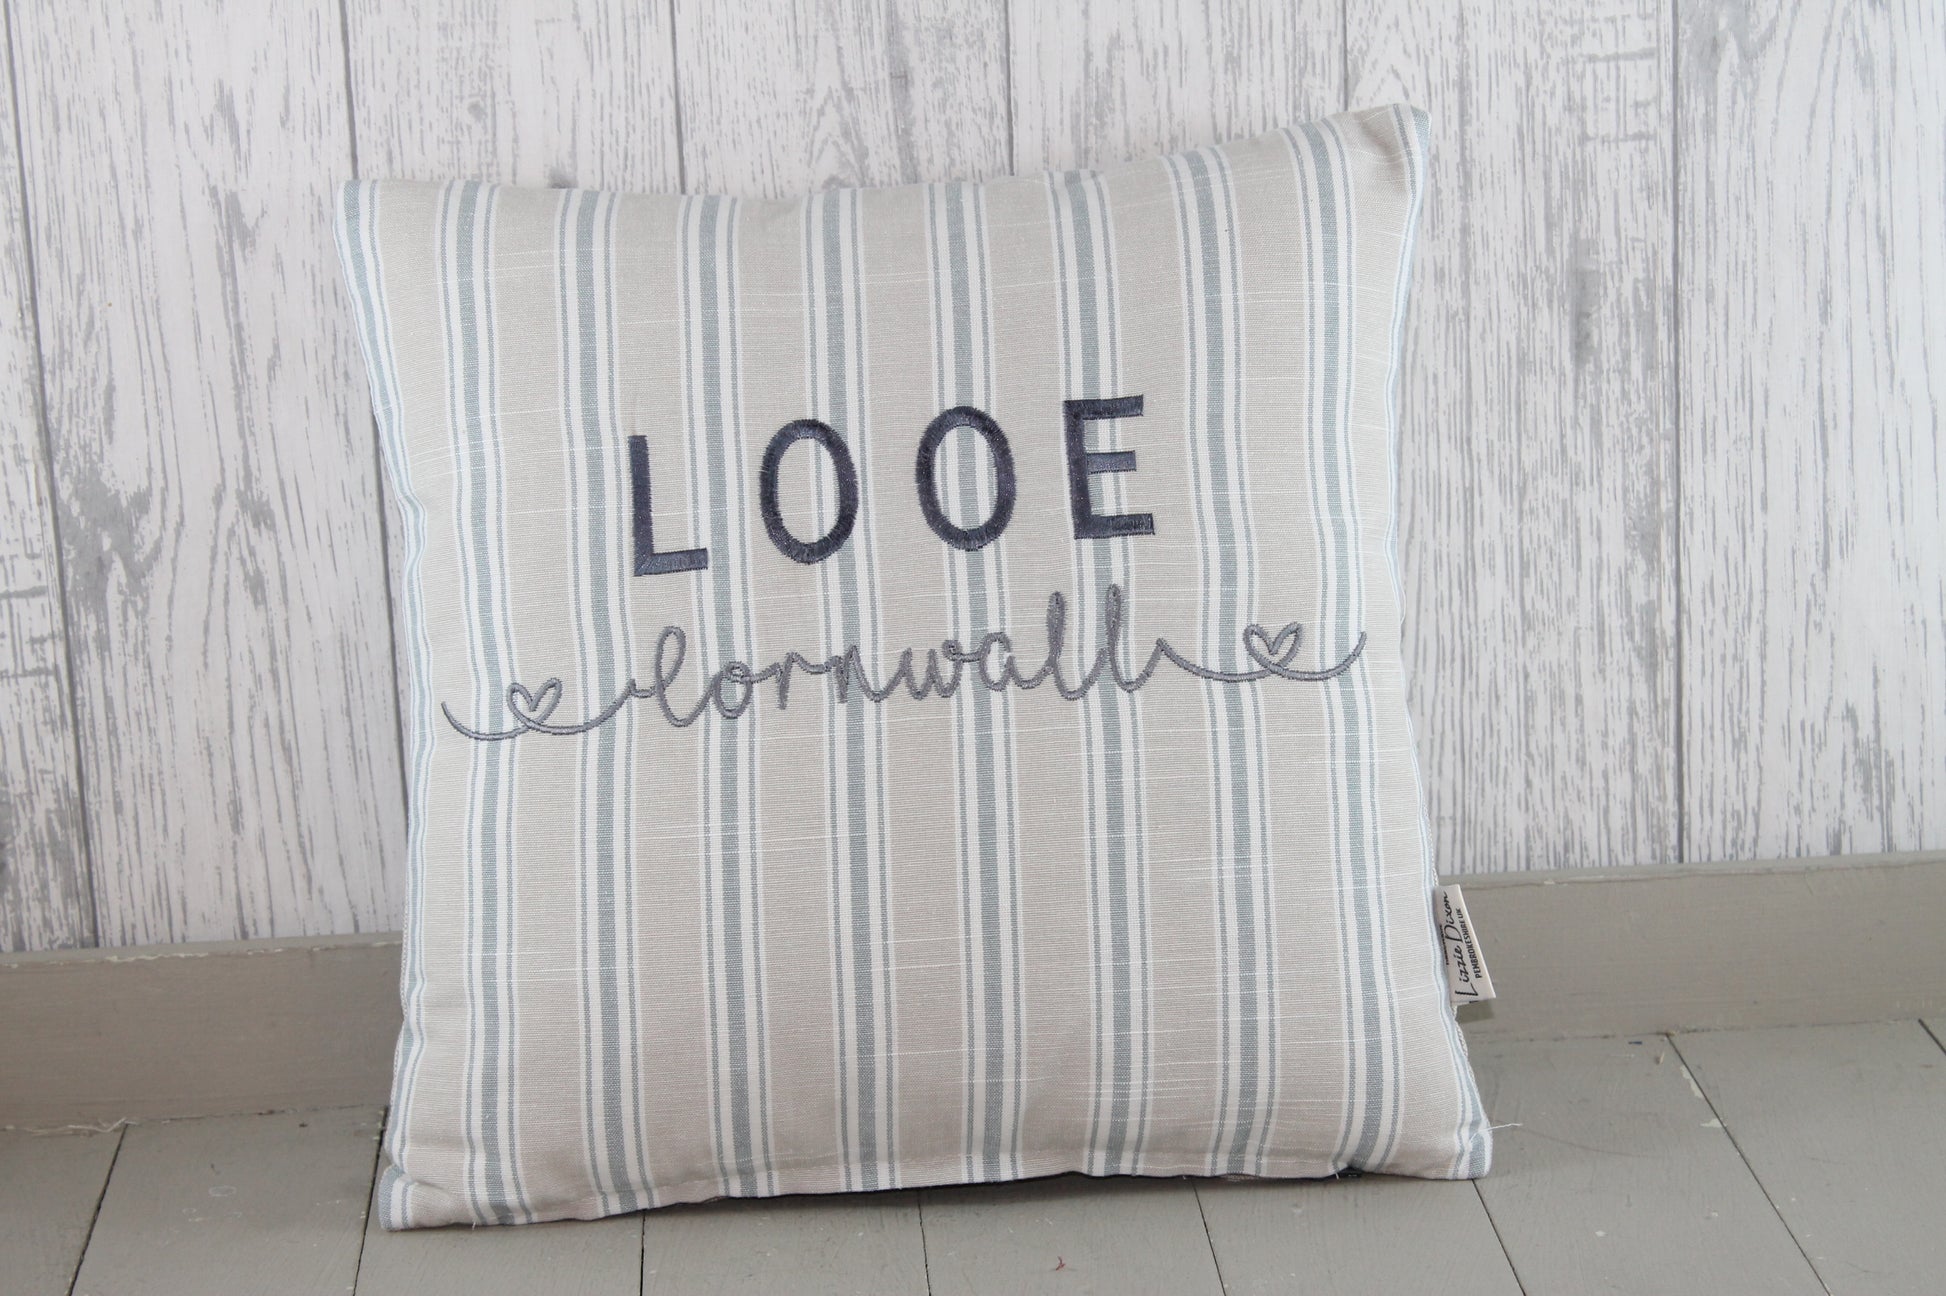 Location Cushion - Nautical Taupe and Blue Stripe and Plain Taupe back- 14" Square Cushion Cushion Personalise with your Favourite Location - Lizzie Dixon Designs